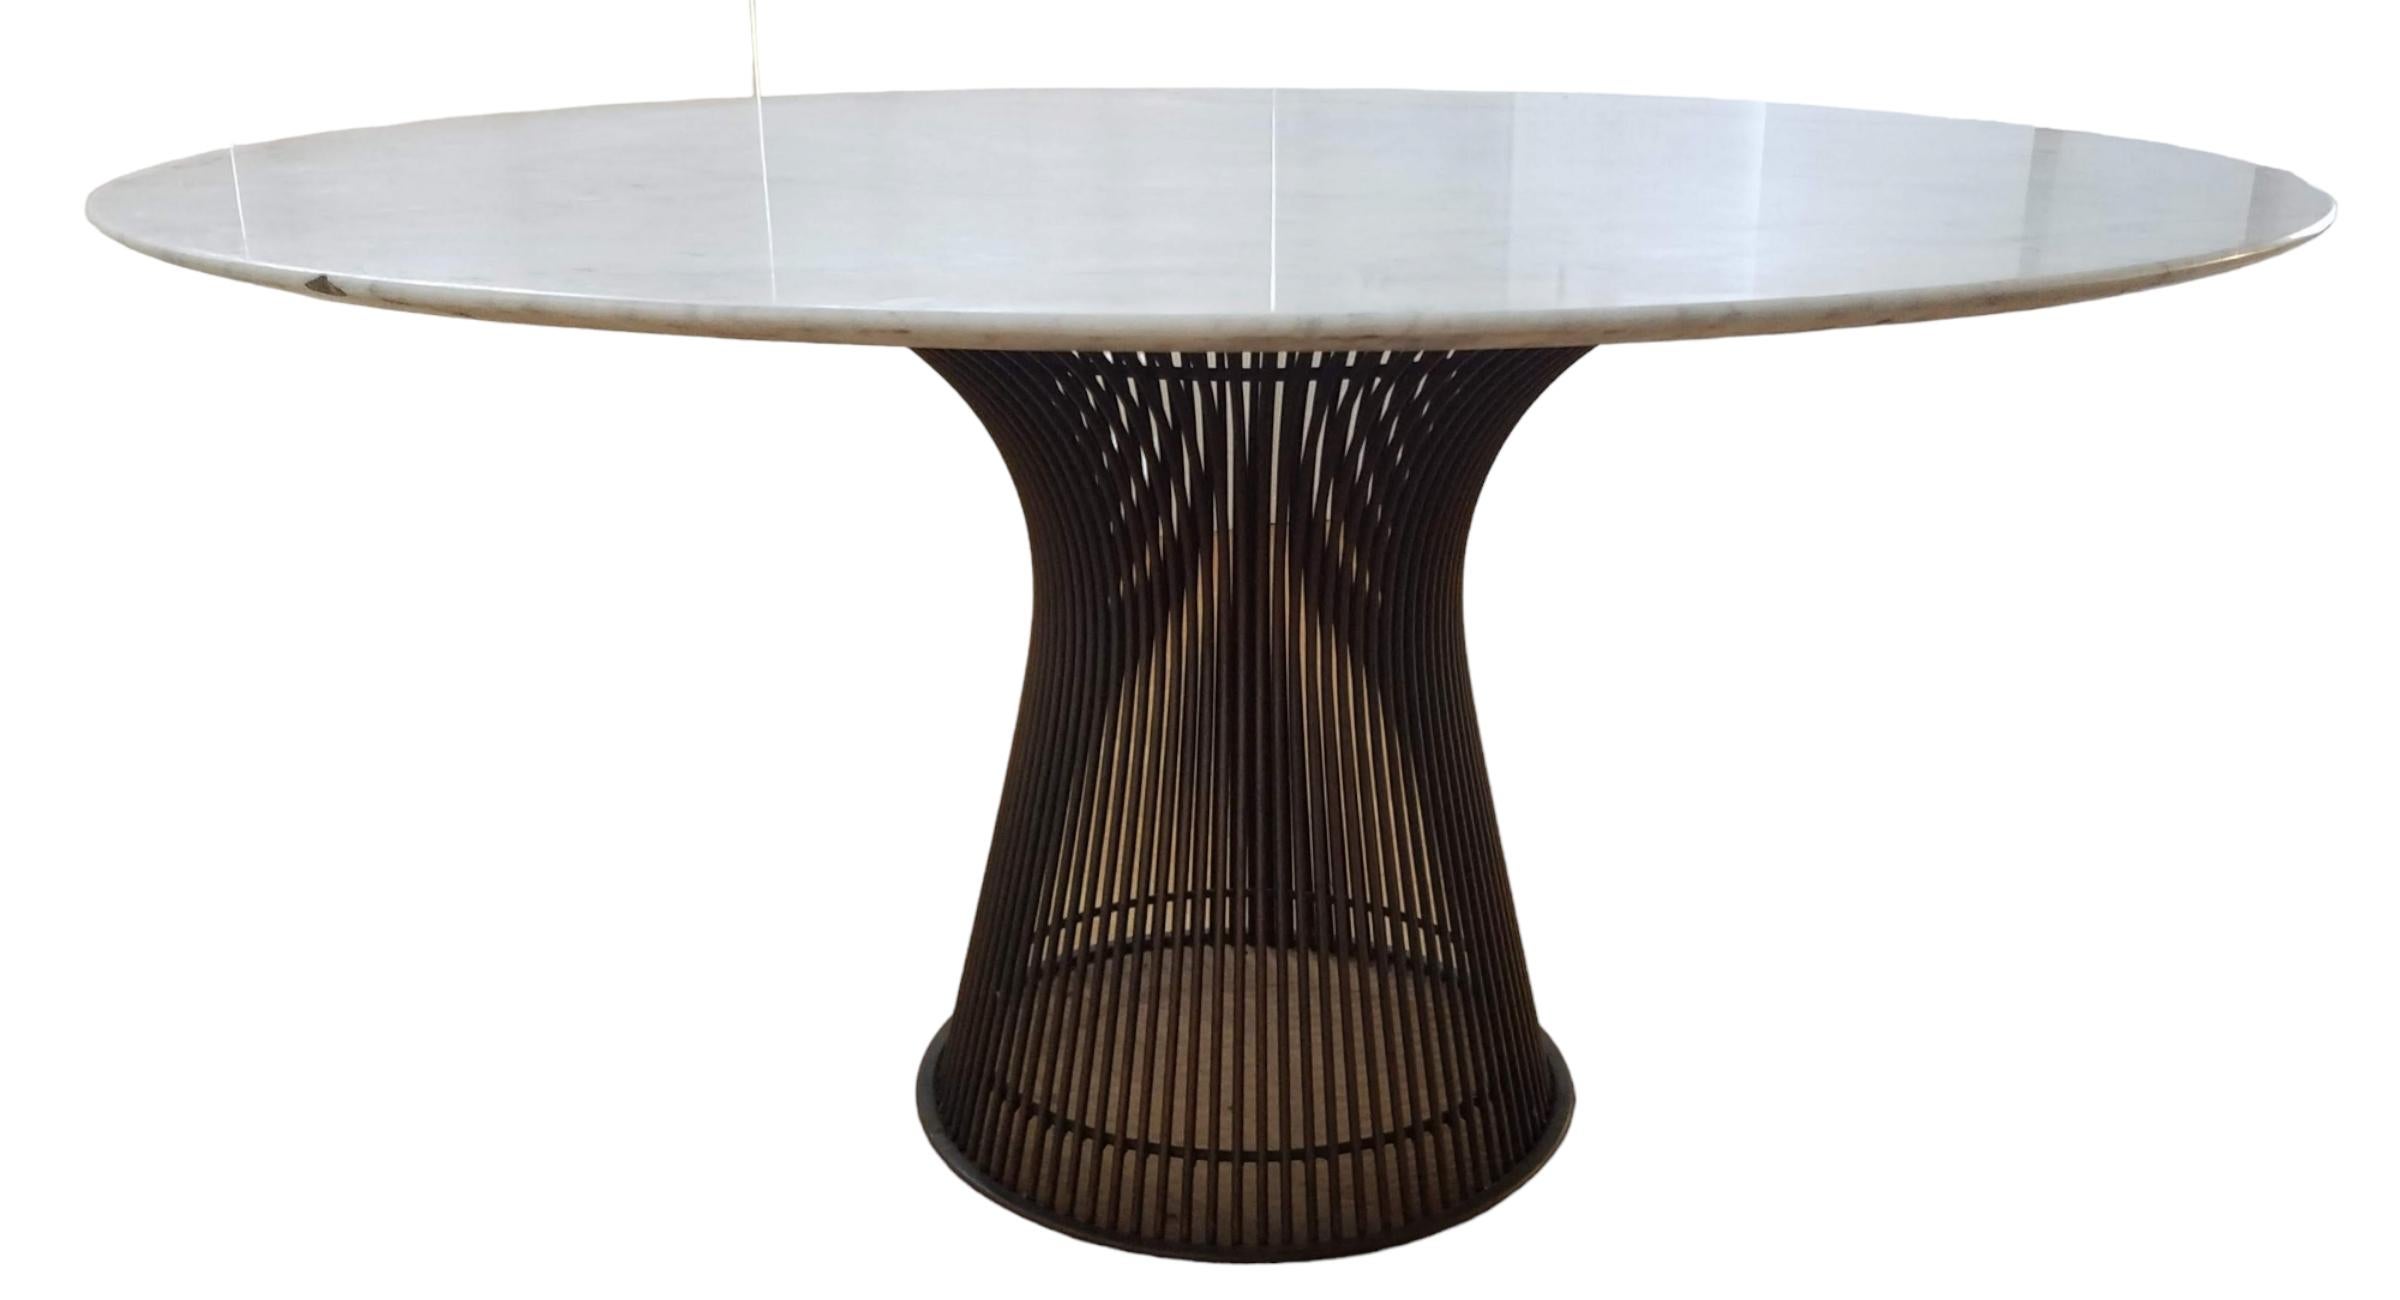 Plated Warren Platner Bronze Base Arabescato Marble Top Dining Table for Knoll, 1960s